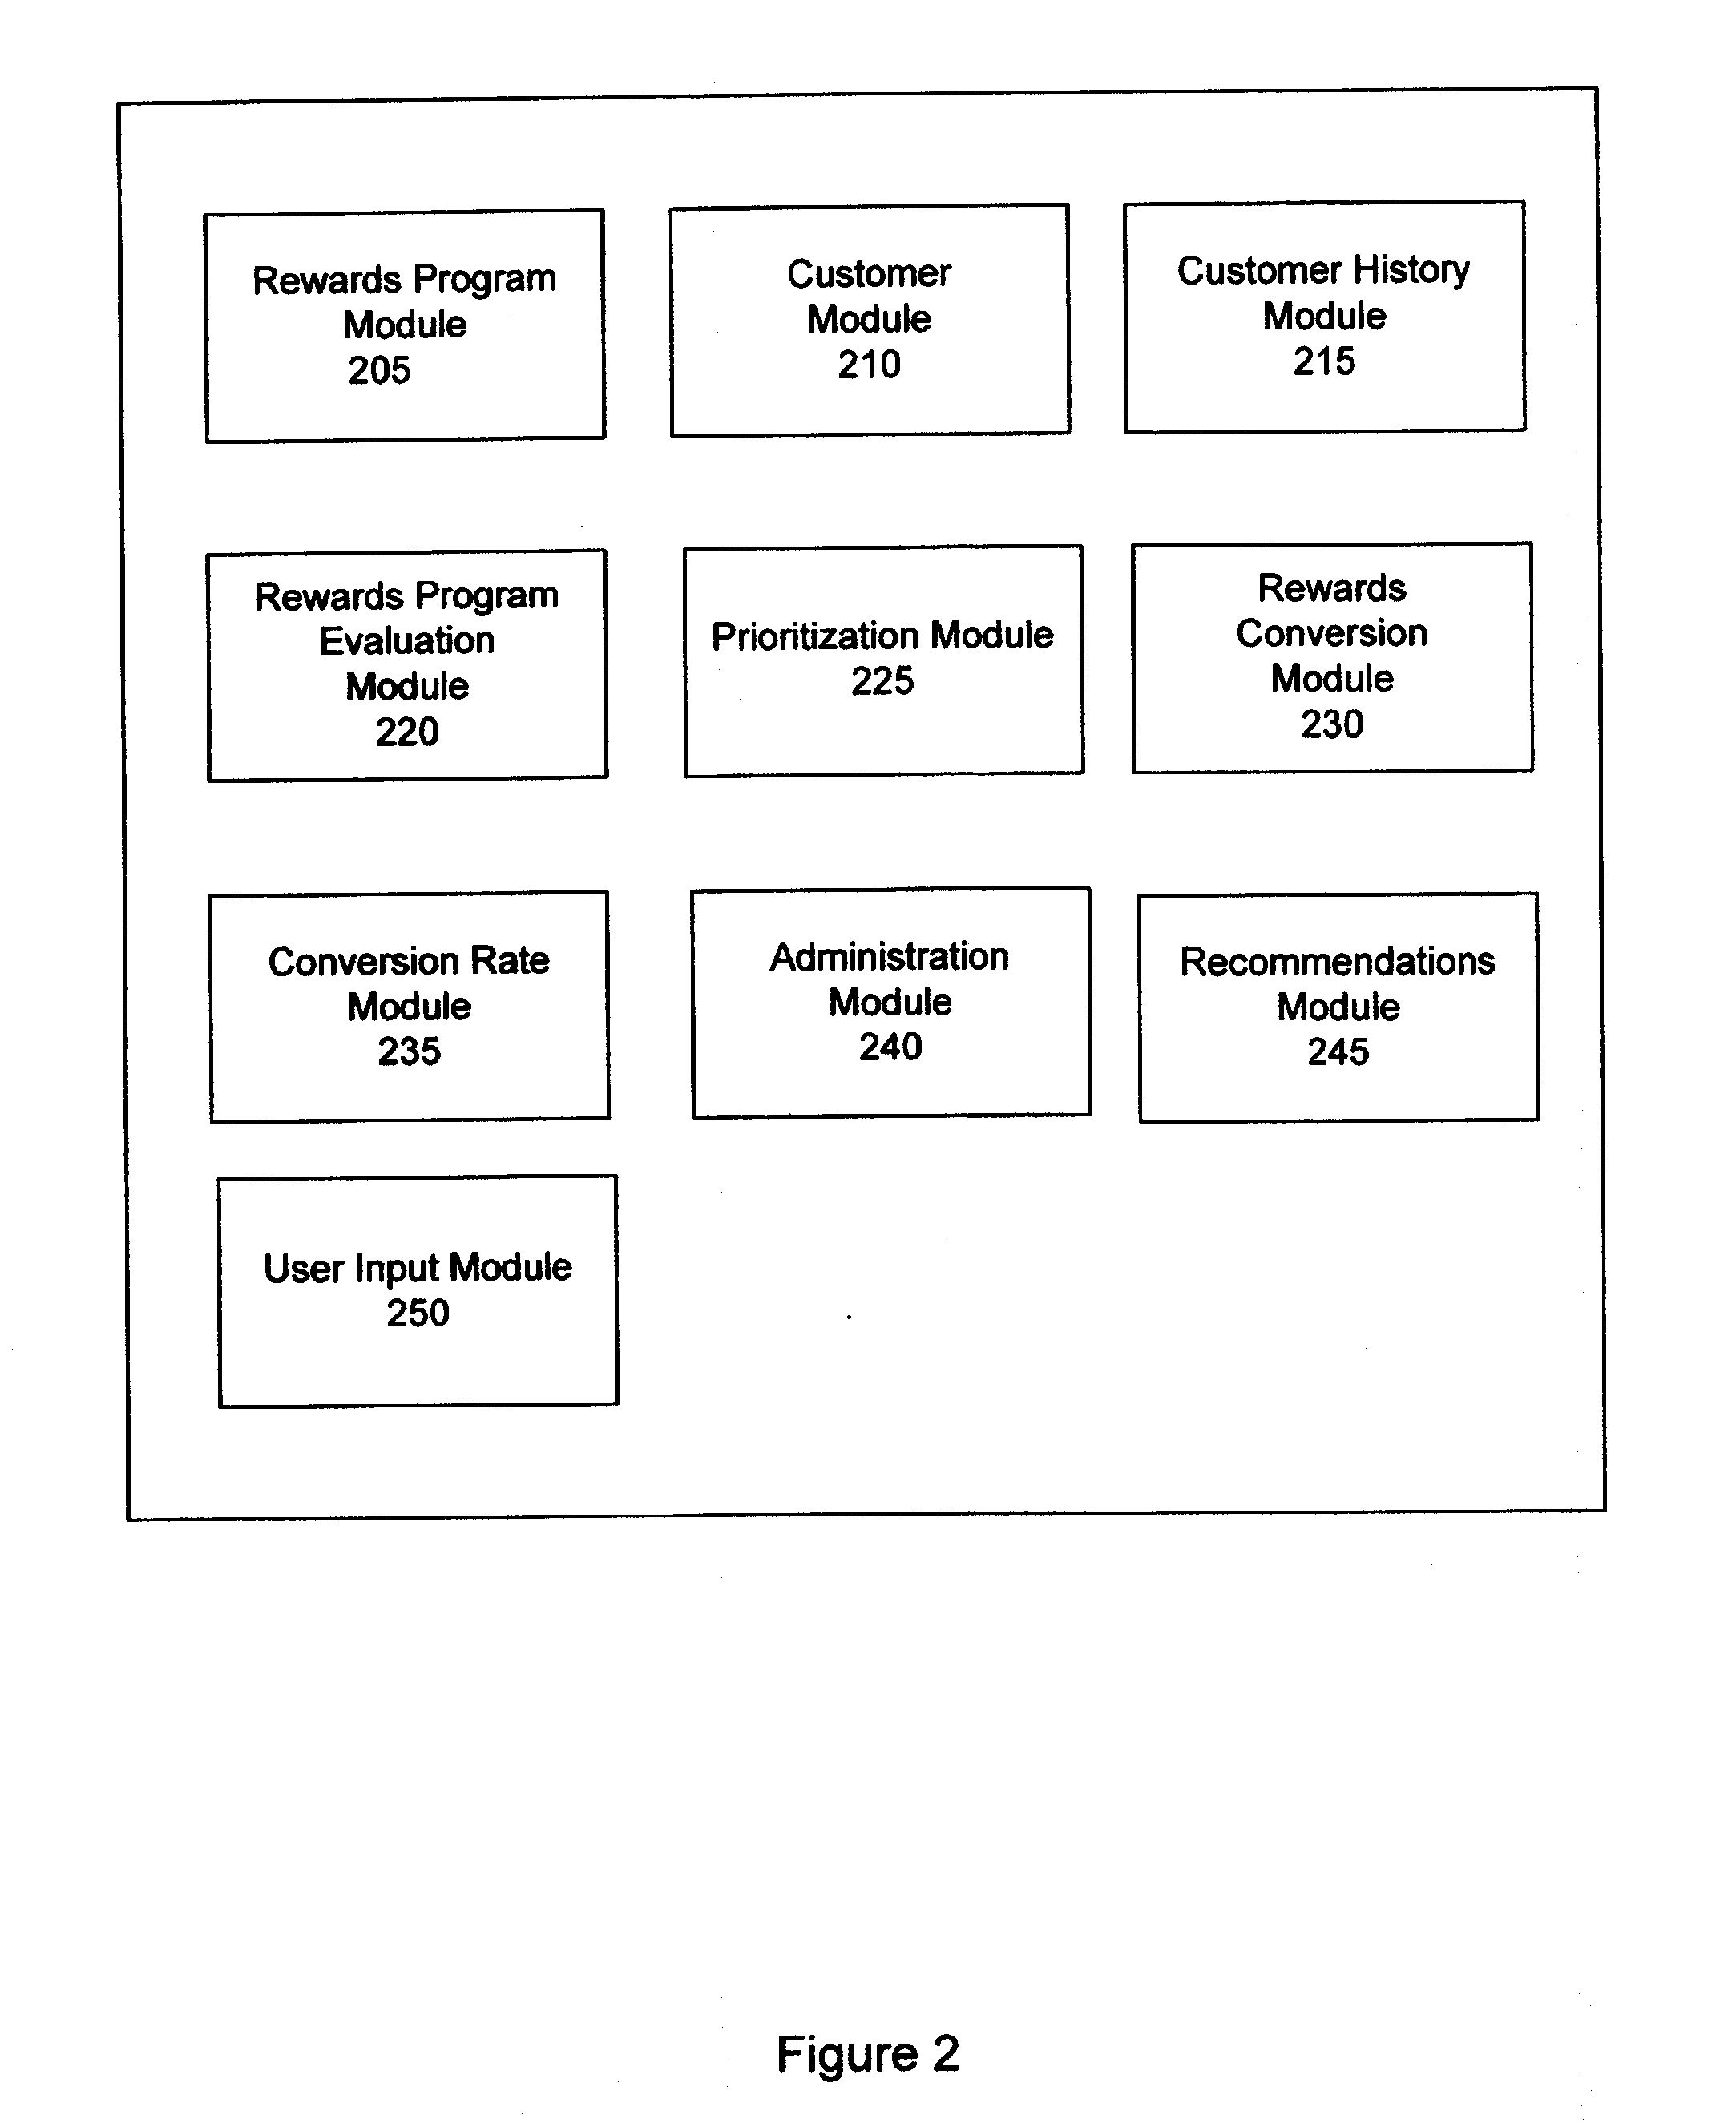 System and Method for Dynamically Identifying, Prioritizing and Offering Reward Categories